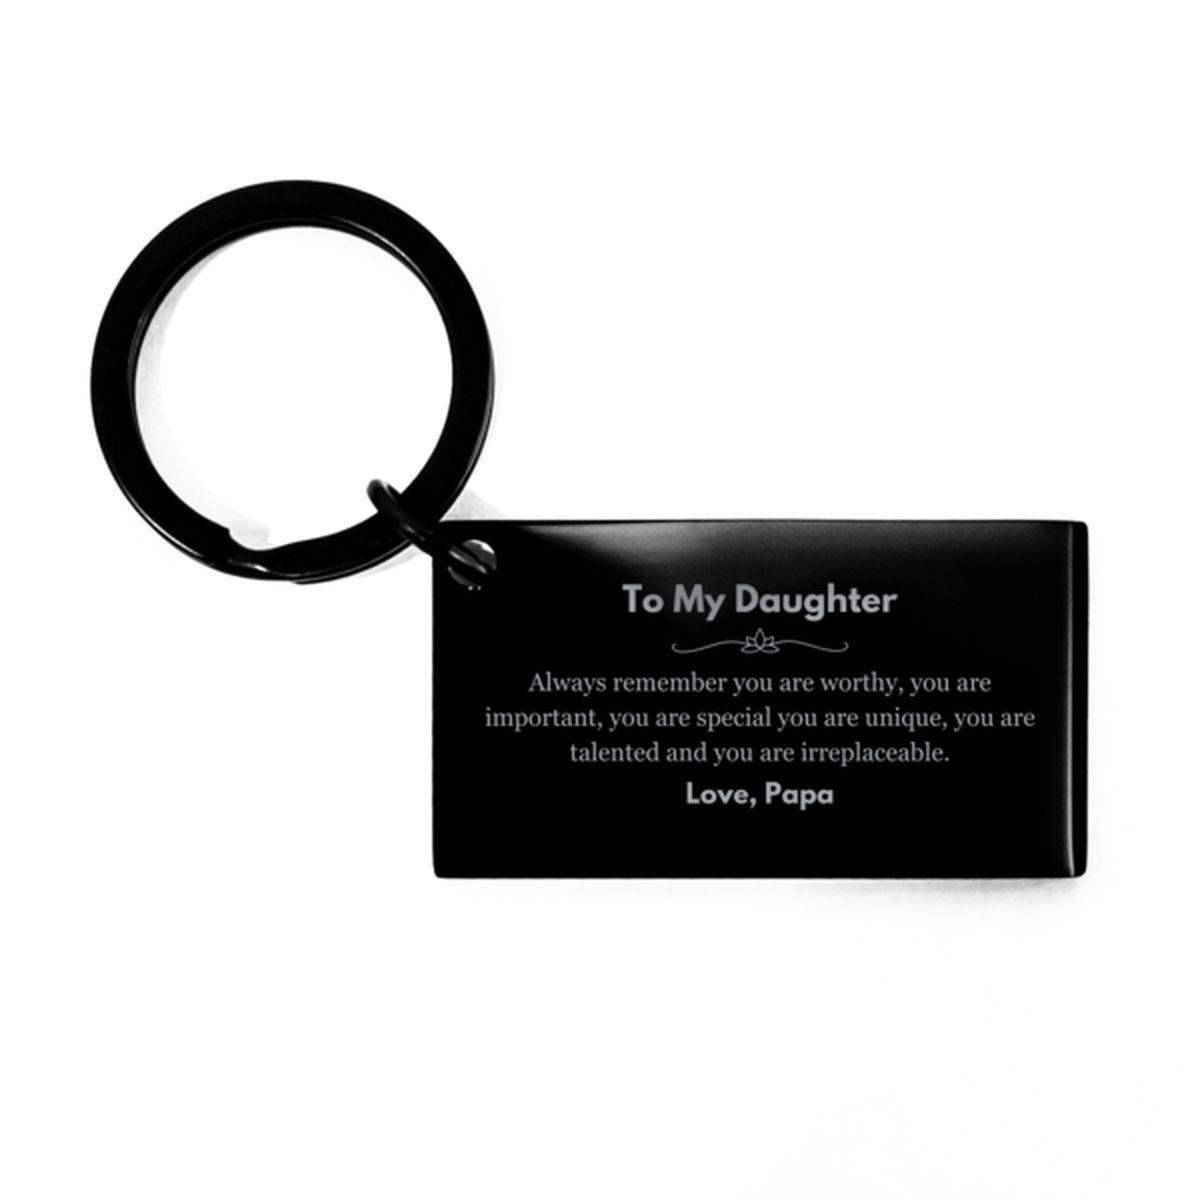 Daughter Birthday Gifts from Papa, Inspirational Keychain for Daughter Christmas Graduation Gifts for Daughter Always remember you are worthy, you are important. Love, Papa